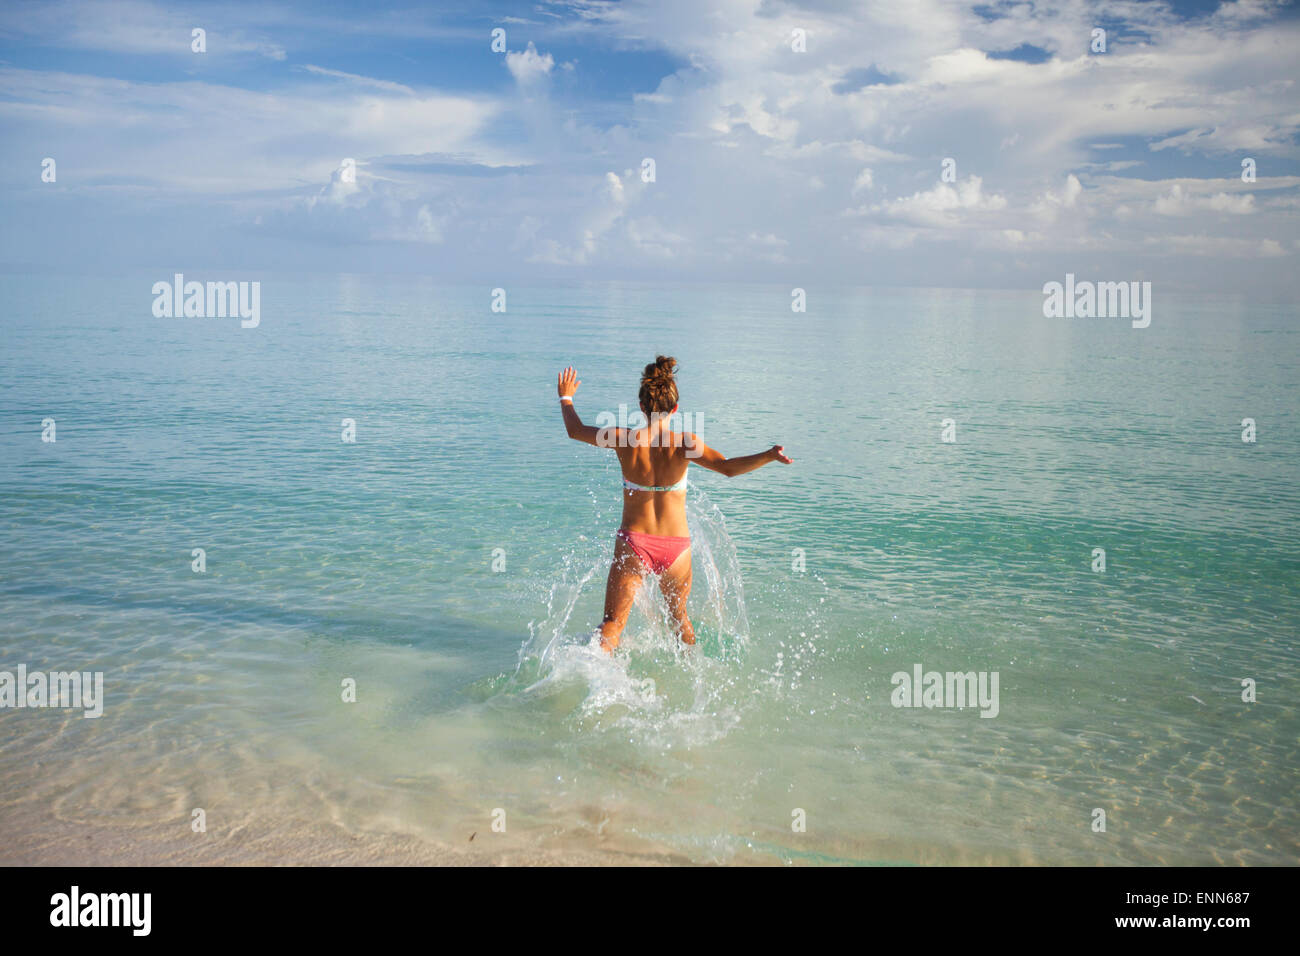 A young woman runs into shallow turquoise water while on vacation in Cuba. Stock Photo